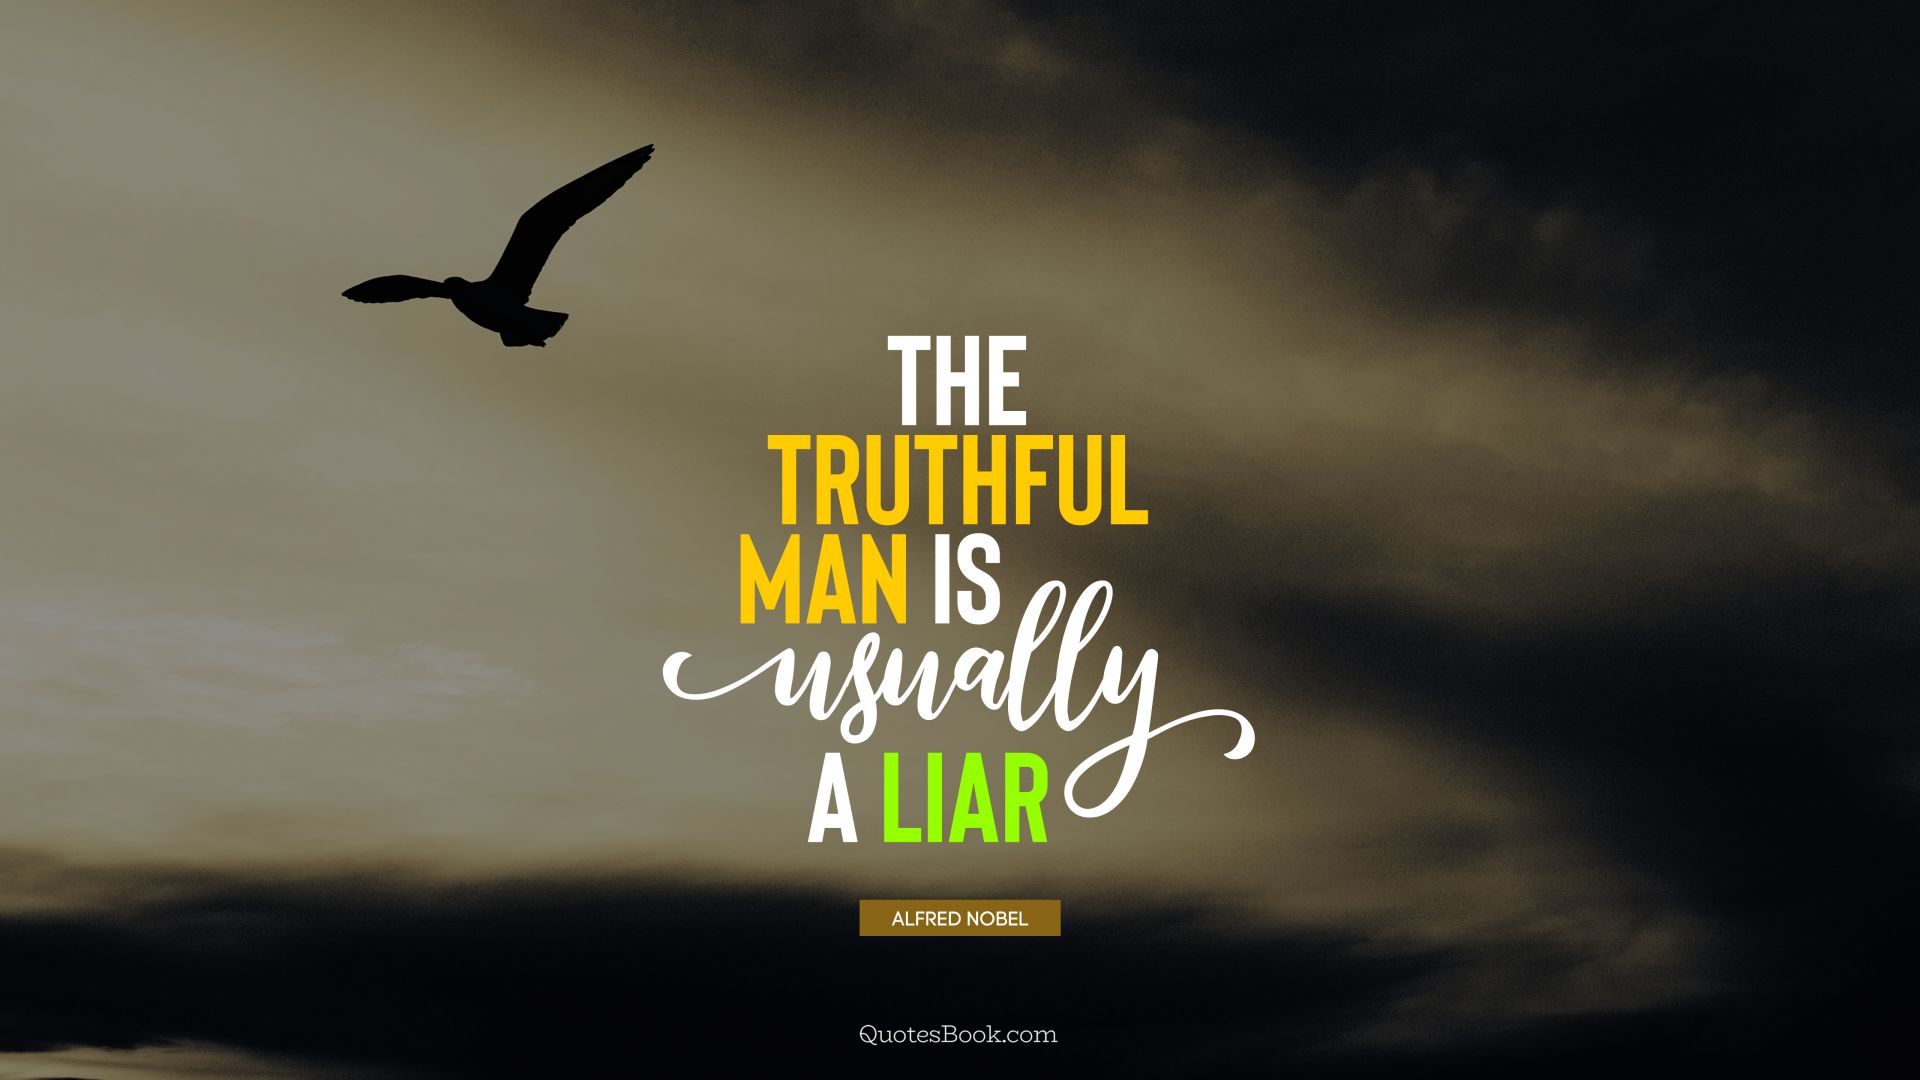 The truthful man is usually a liar. - Quote by Alfred Nobel